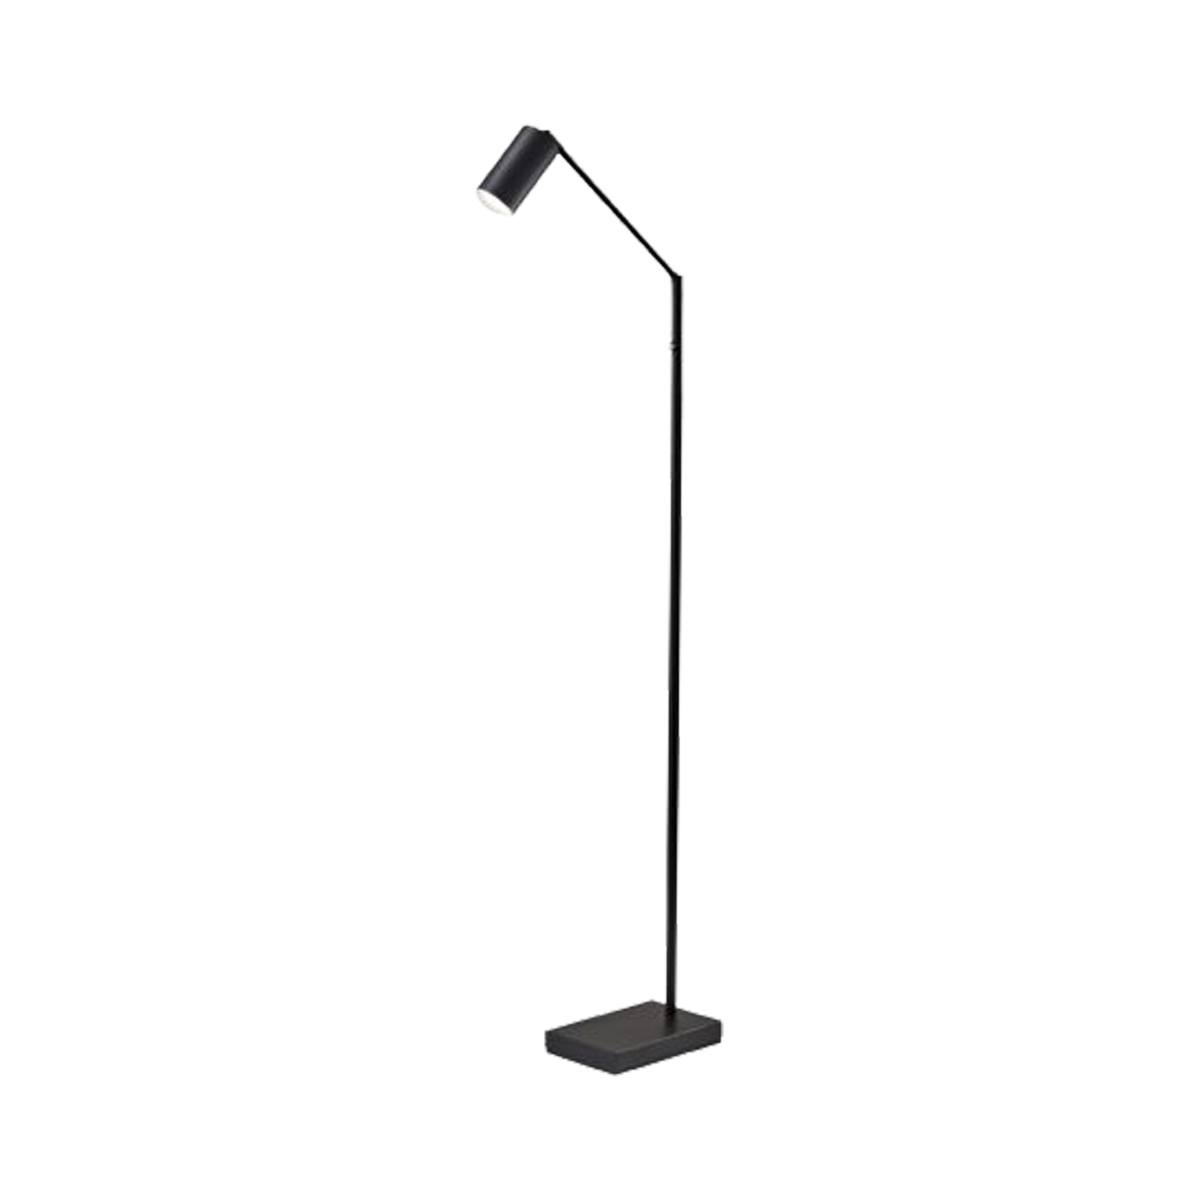 A minimalist, modern style, the Hendrix LED Floor Lamp is made up of thin, sharp lines and matte black metals.